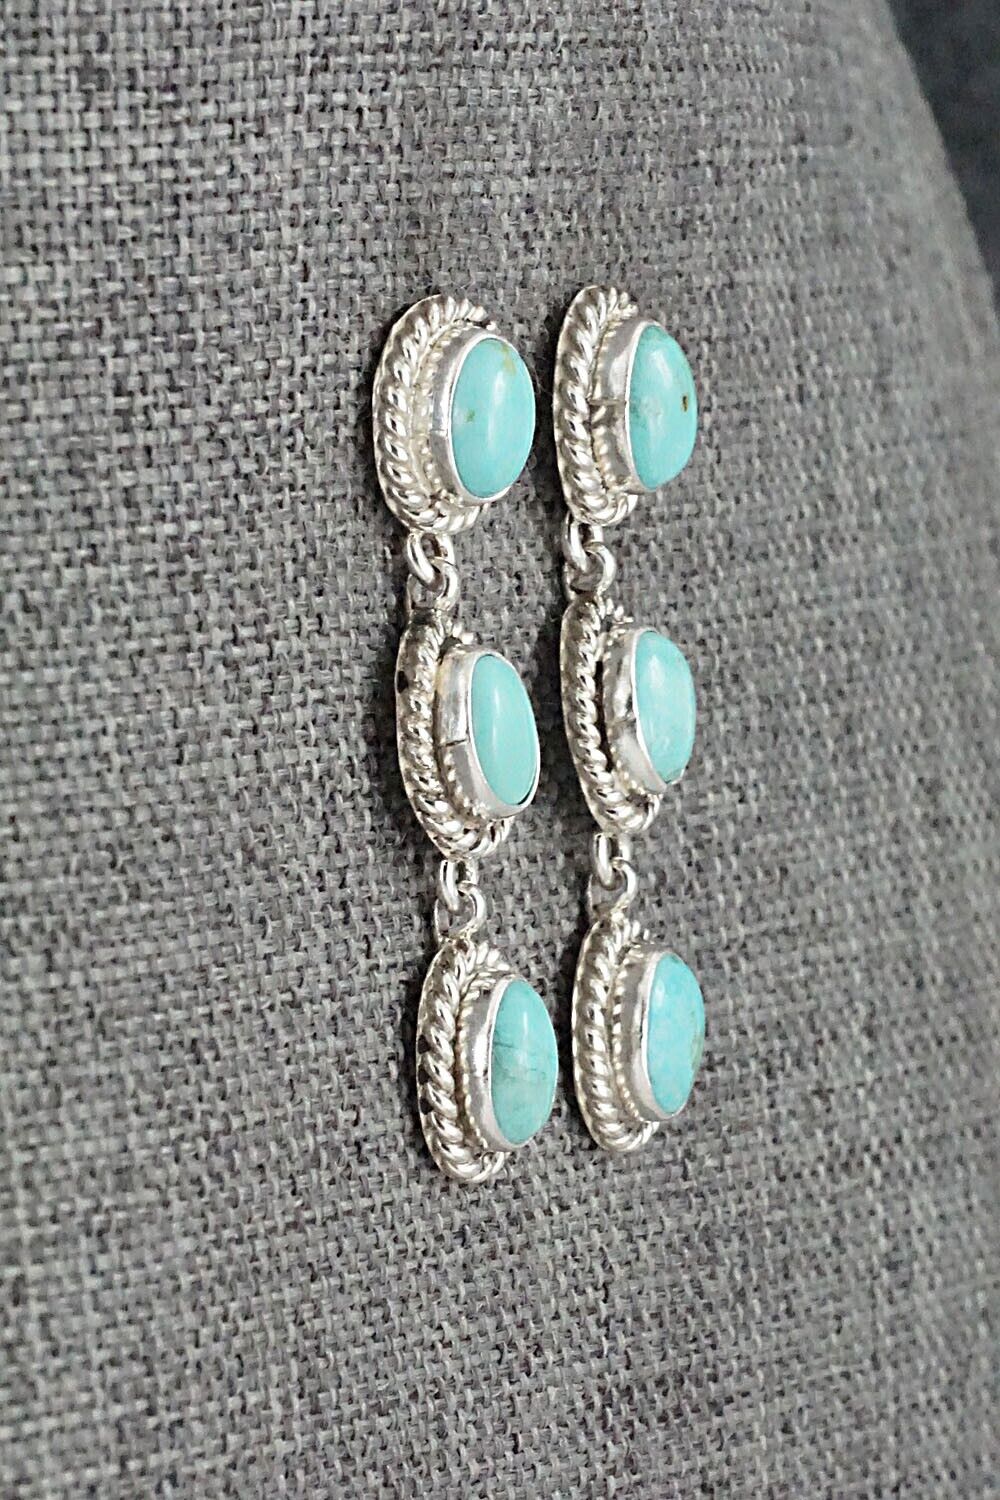 Turquoise and Sterling Silver Earrings - Peggy Skeets